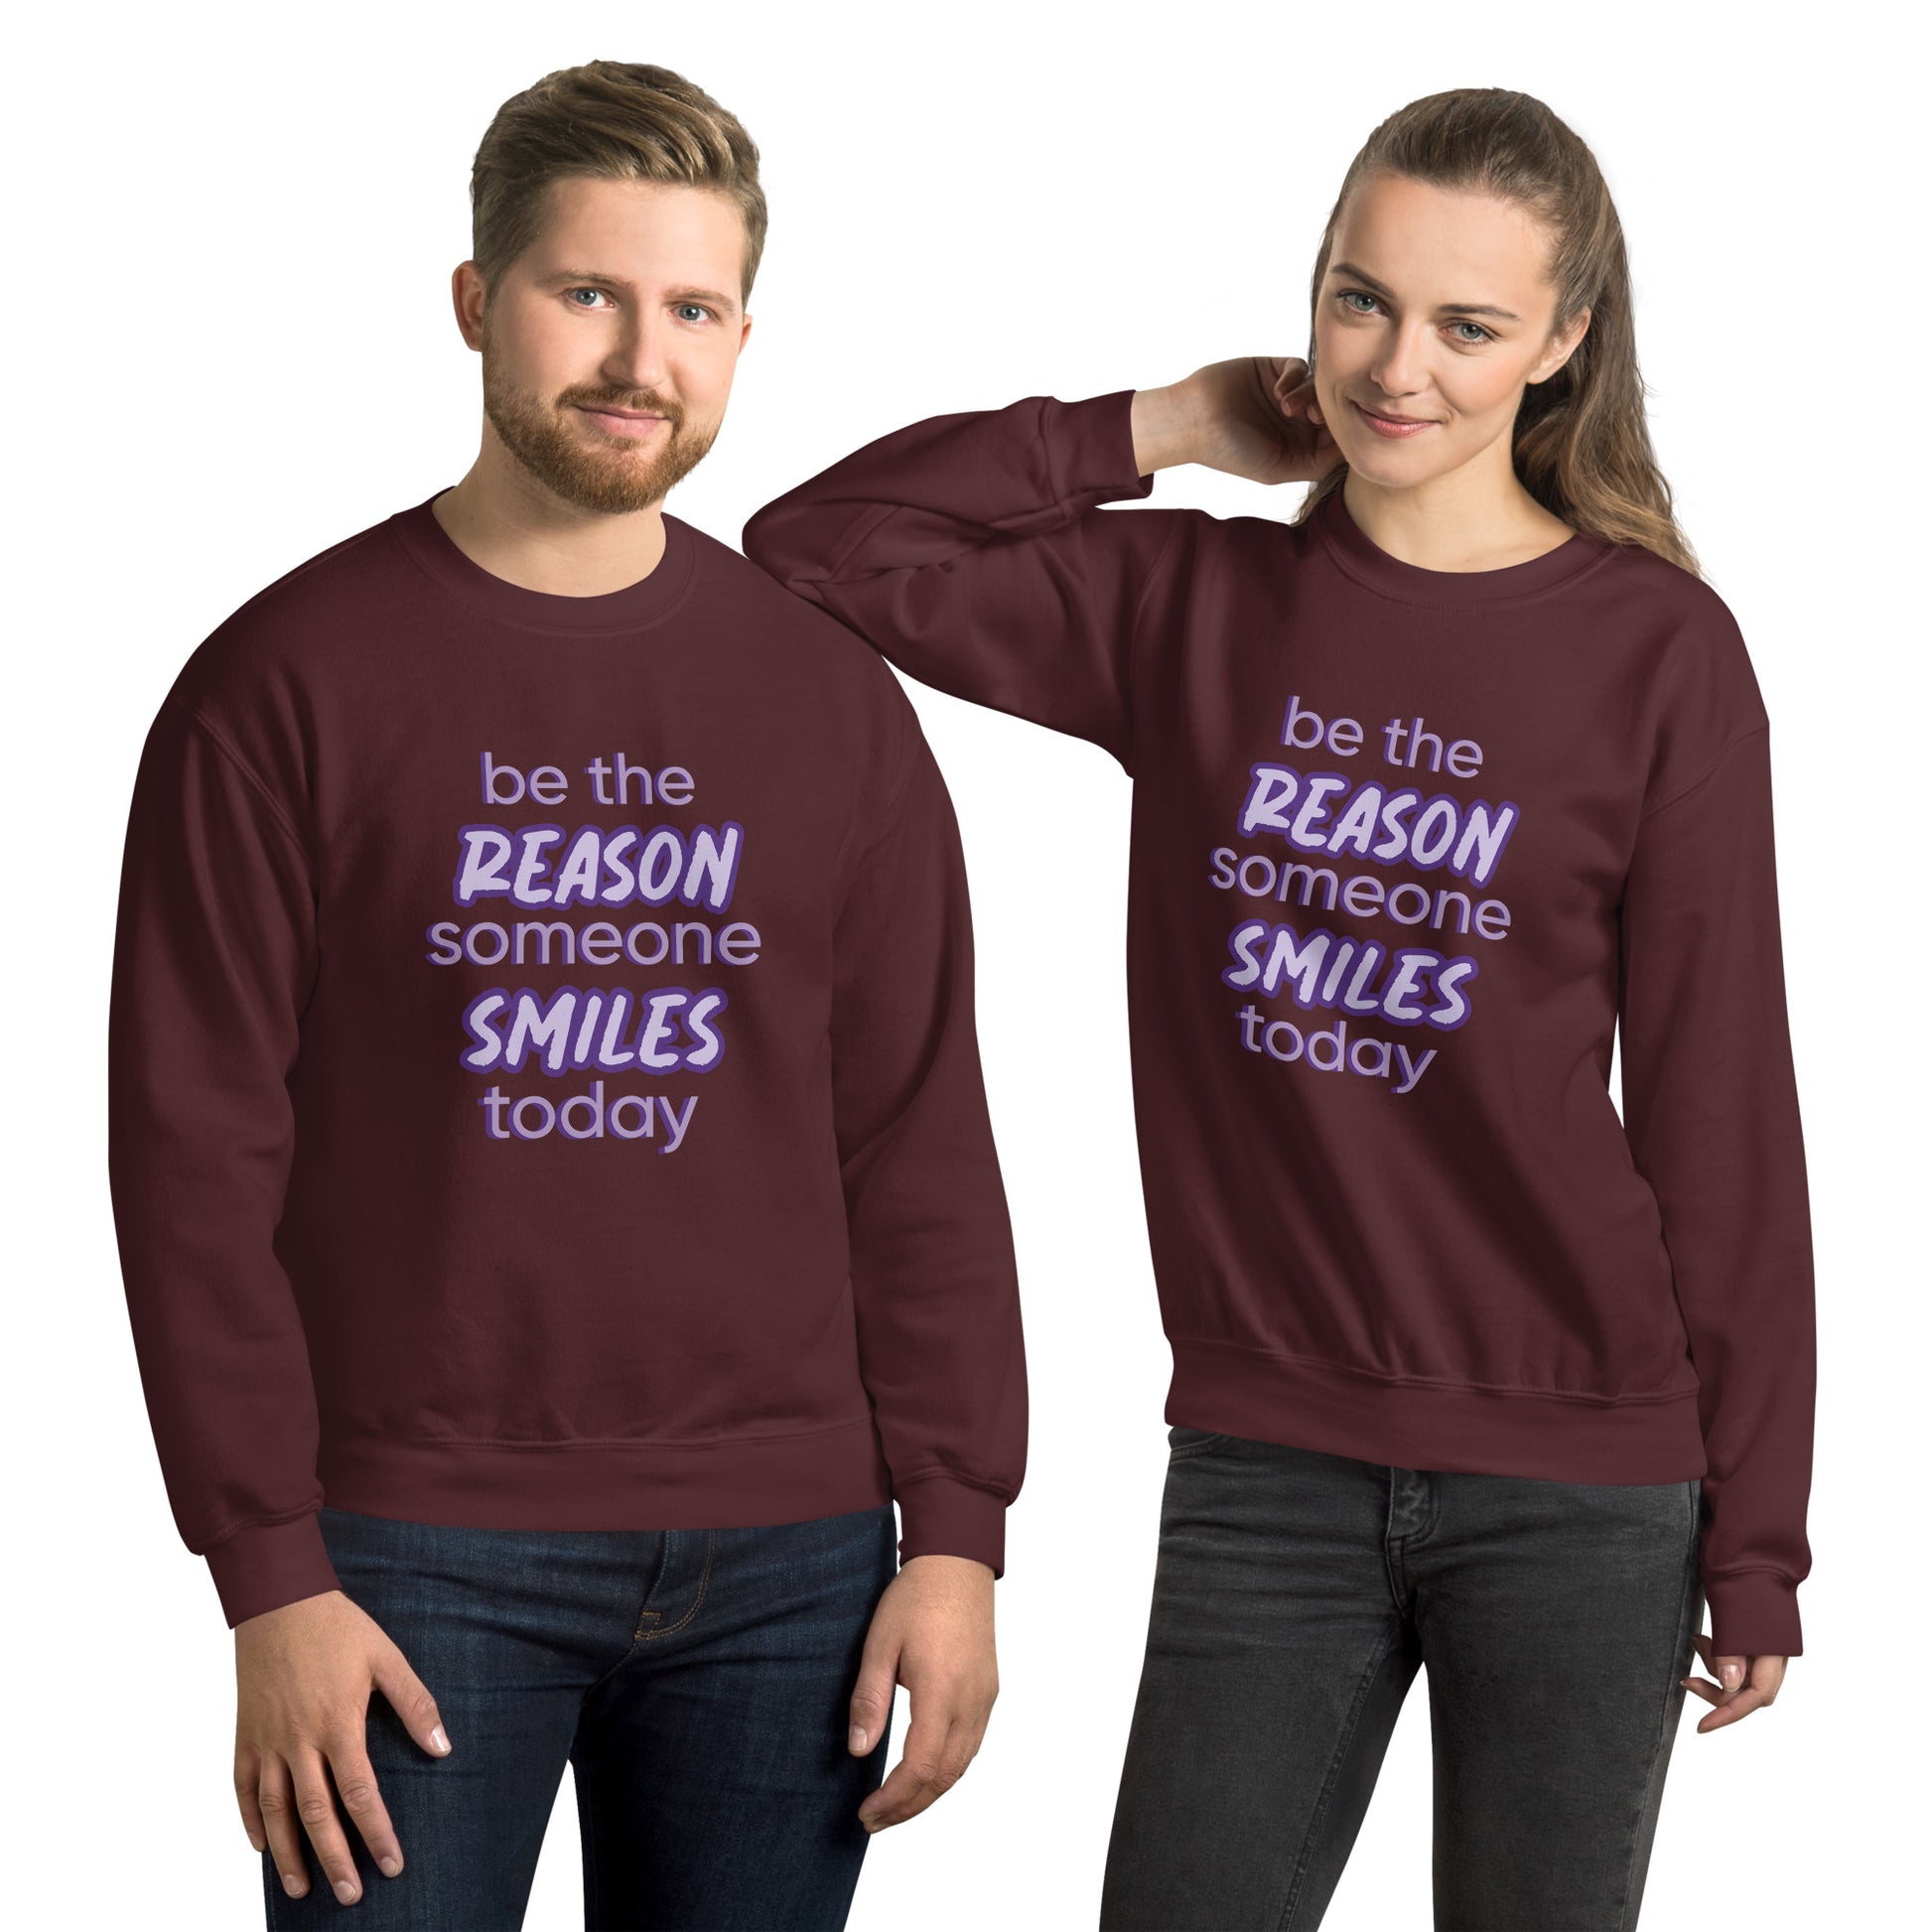 Men and women with maroon sweater and the quote "be the reason someone smiles today" in purple on it. 